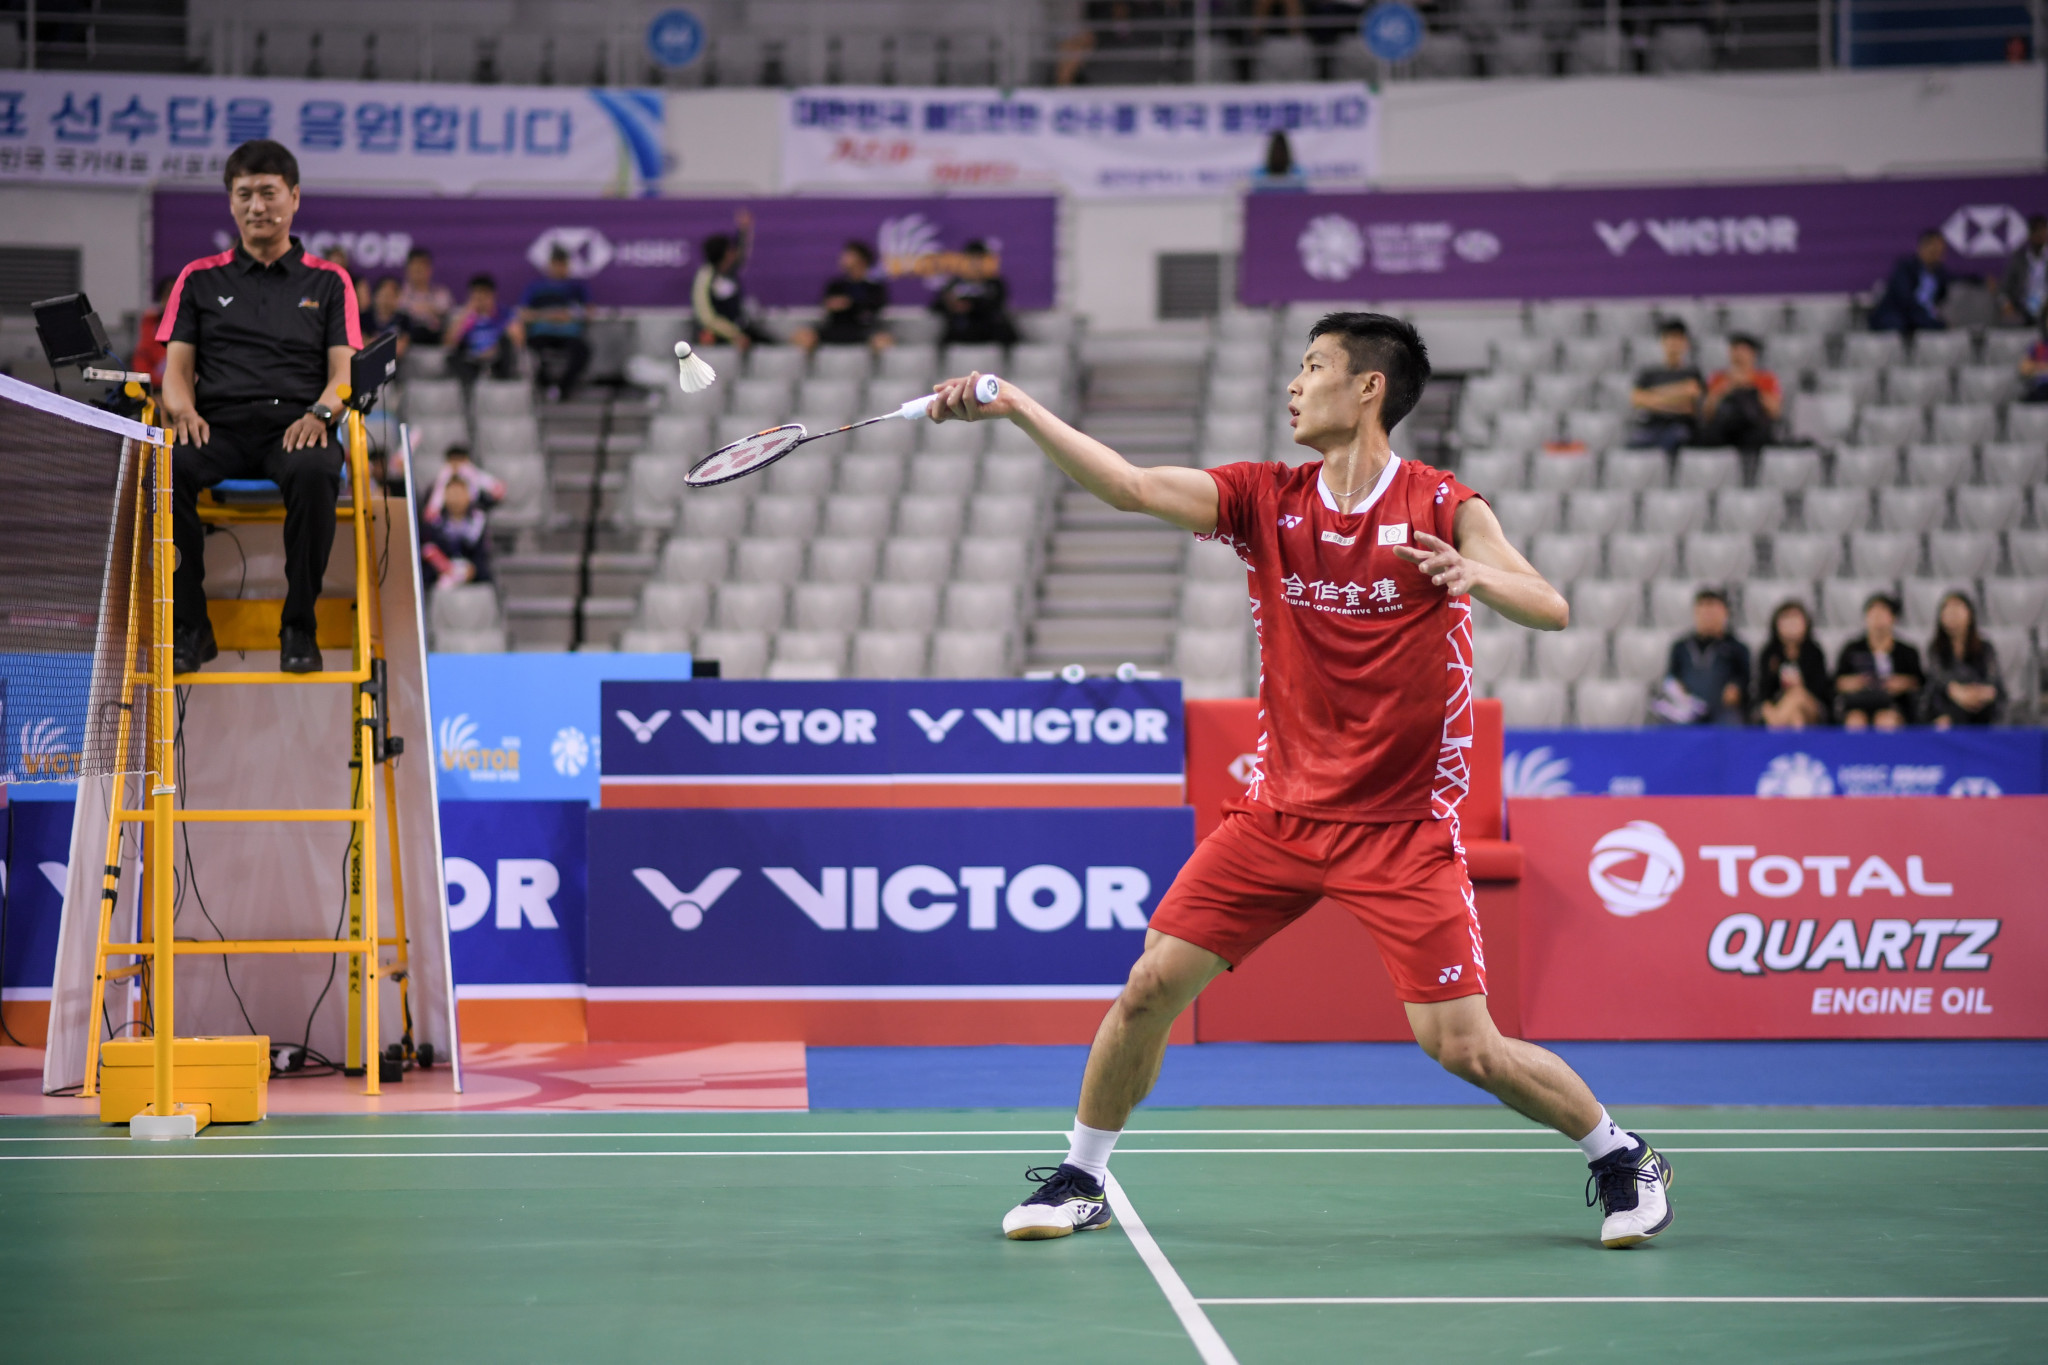 Home top seeds march on at BWF Chinese Taipei Open